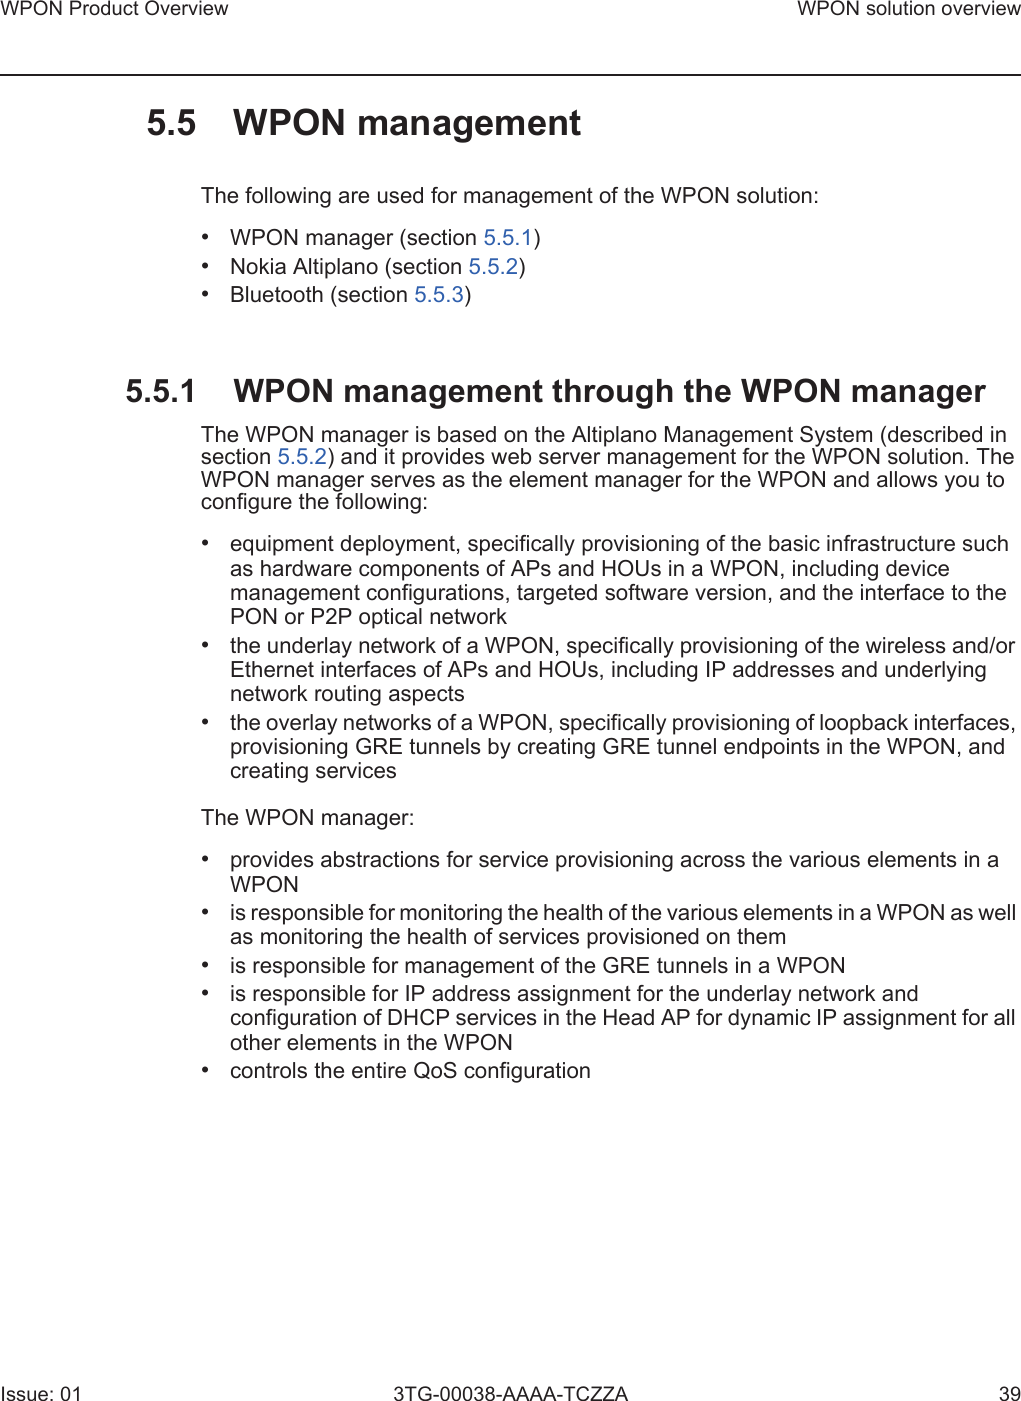 WPON Product Overview WPON solution overviewIssue: 01 3TG-00038-AAAA-TCZZA 395.5 WPON managementThe following are used for management of the WPON solution:•WPON manager (section 5.5.1)•Nokia Altiplano (section 5.5.2)•Bluetooth (section 5.5.3)5.5.1 WPON management through the WPON manager The WPON manager is based on the Altiplano Management System (described in section 5.5.2) and it provides web server management for the WPON solution. The WPON manager serves as the element manager for the WPON and allows you to configure the following:•equipment deployment, specifically provisioning of the basic infrastructure suchas hardware components of APs and HOUs in a WPON, including devicemanagement configurations, targeted software version, and the interface to thePON or P2P optical network•the underlay network of a WPON, specifically provisioning of the wireless and/orEthernet interfaces of APs and HOUs, including IP addresses and underlyingnetwork routing aspects•the overlay networks of a WPON, specifically provisioning of loopback interfaces,provisioning GRE tunnels by creating GRE tunnel endpoints in the WPON, andcreating servicesThe WPON manager:•provides abstractions for service provisioning across the various elements in aWPON•is responsible for monitoring the health of the various elements in a WPON as wellas monitoring the health of services provisioned on them•is responsible for management of the GRE tunnels in a WPON•is responsible for IP address assignment for the underlay network andconfiguration of DHCP services in the Head AP for dynamic IP assignment for allother elements in the WPON•controls the entire QoS configuration